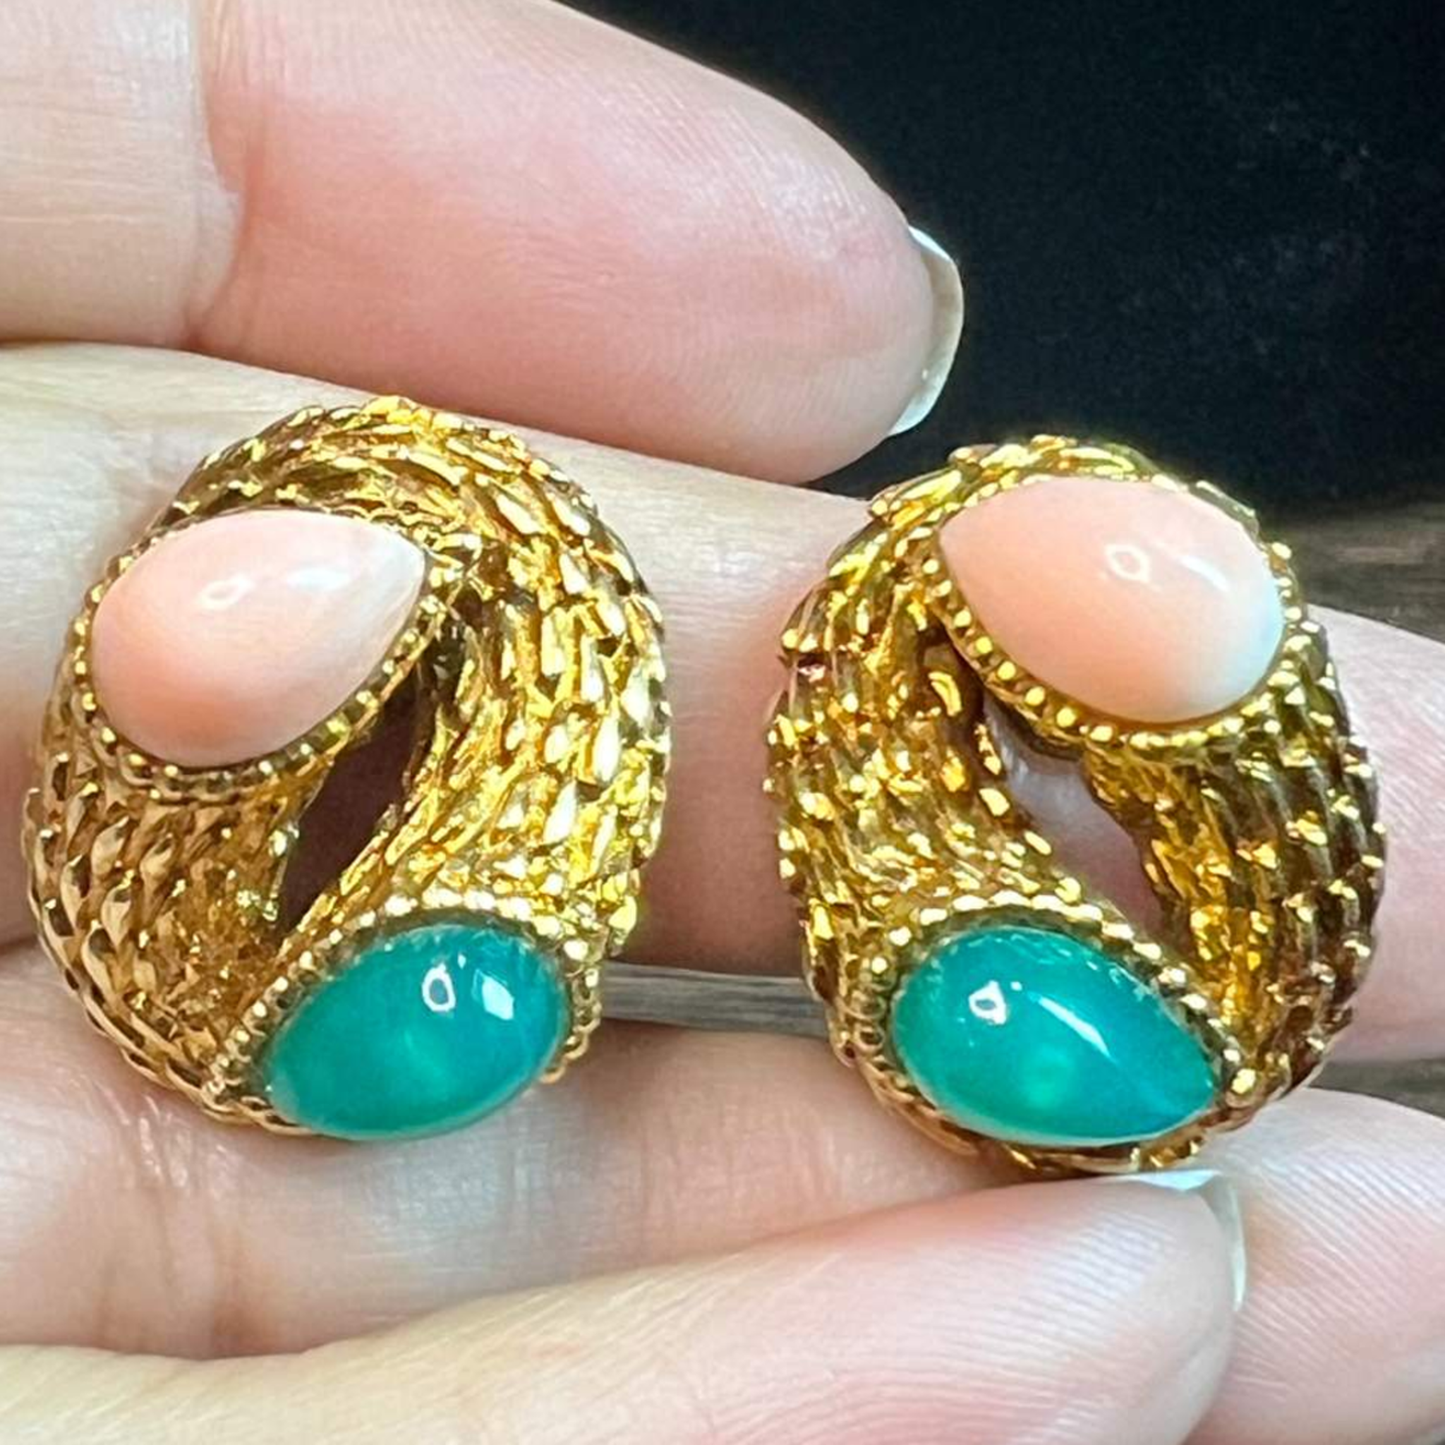 Boucheron Paris 1960s 18KT Yellow Gold Coral & Chrysoprase Earrings in hand